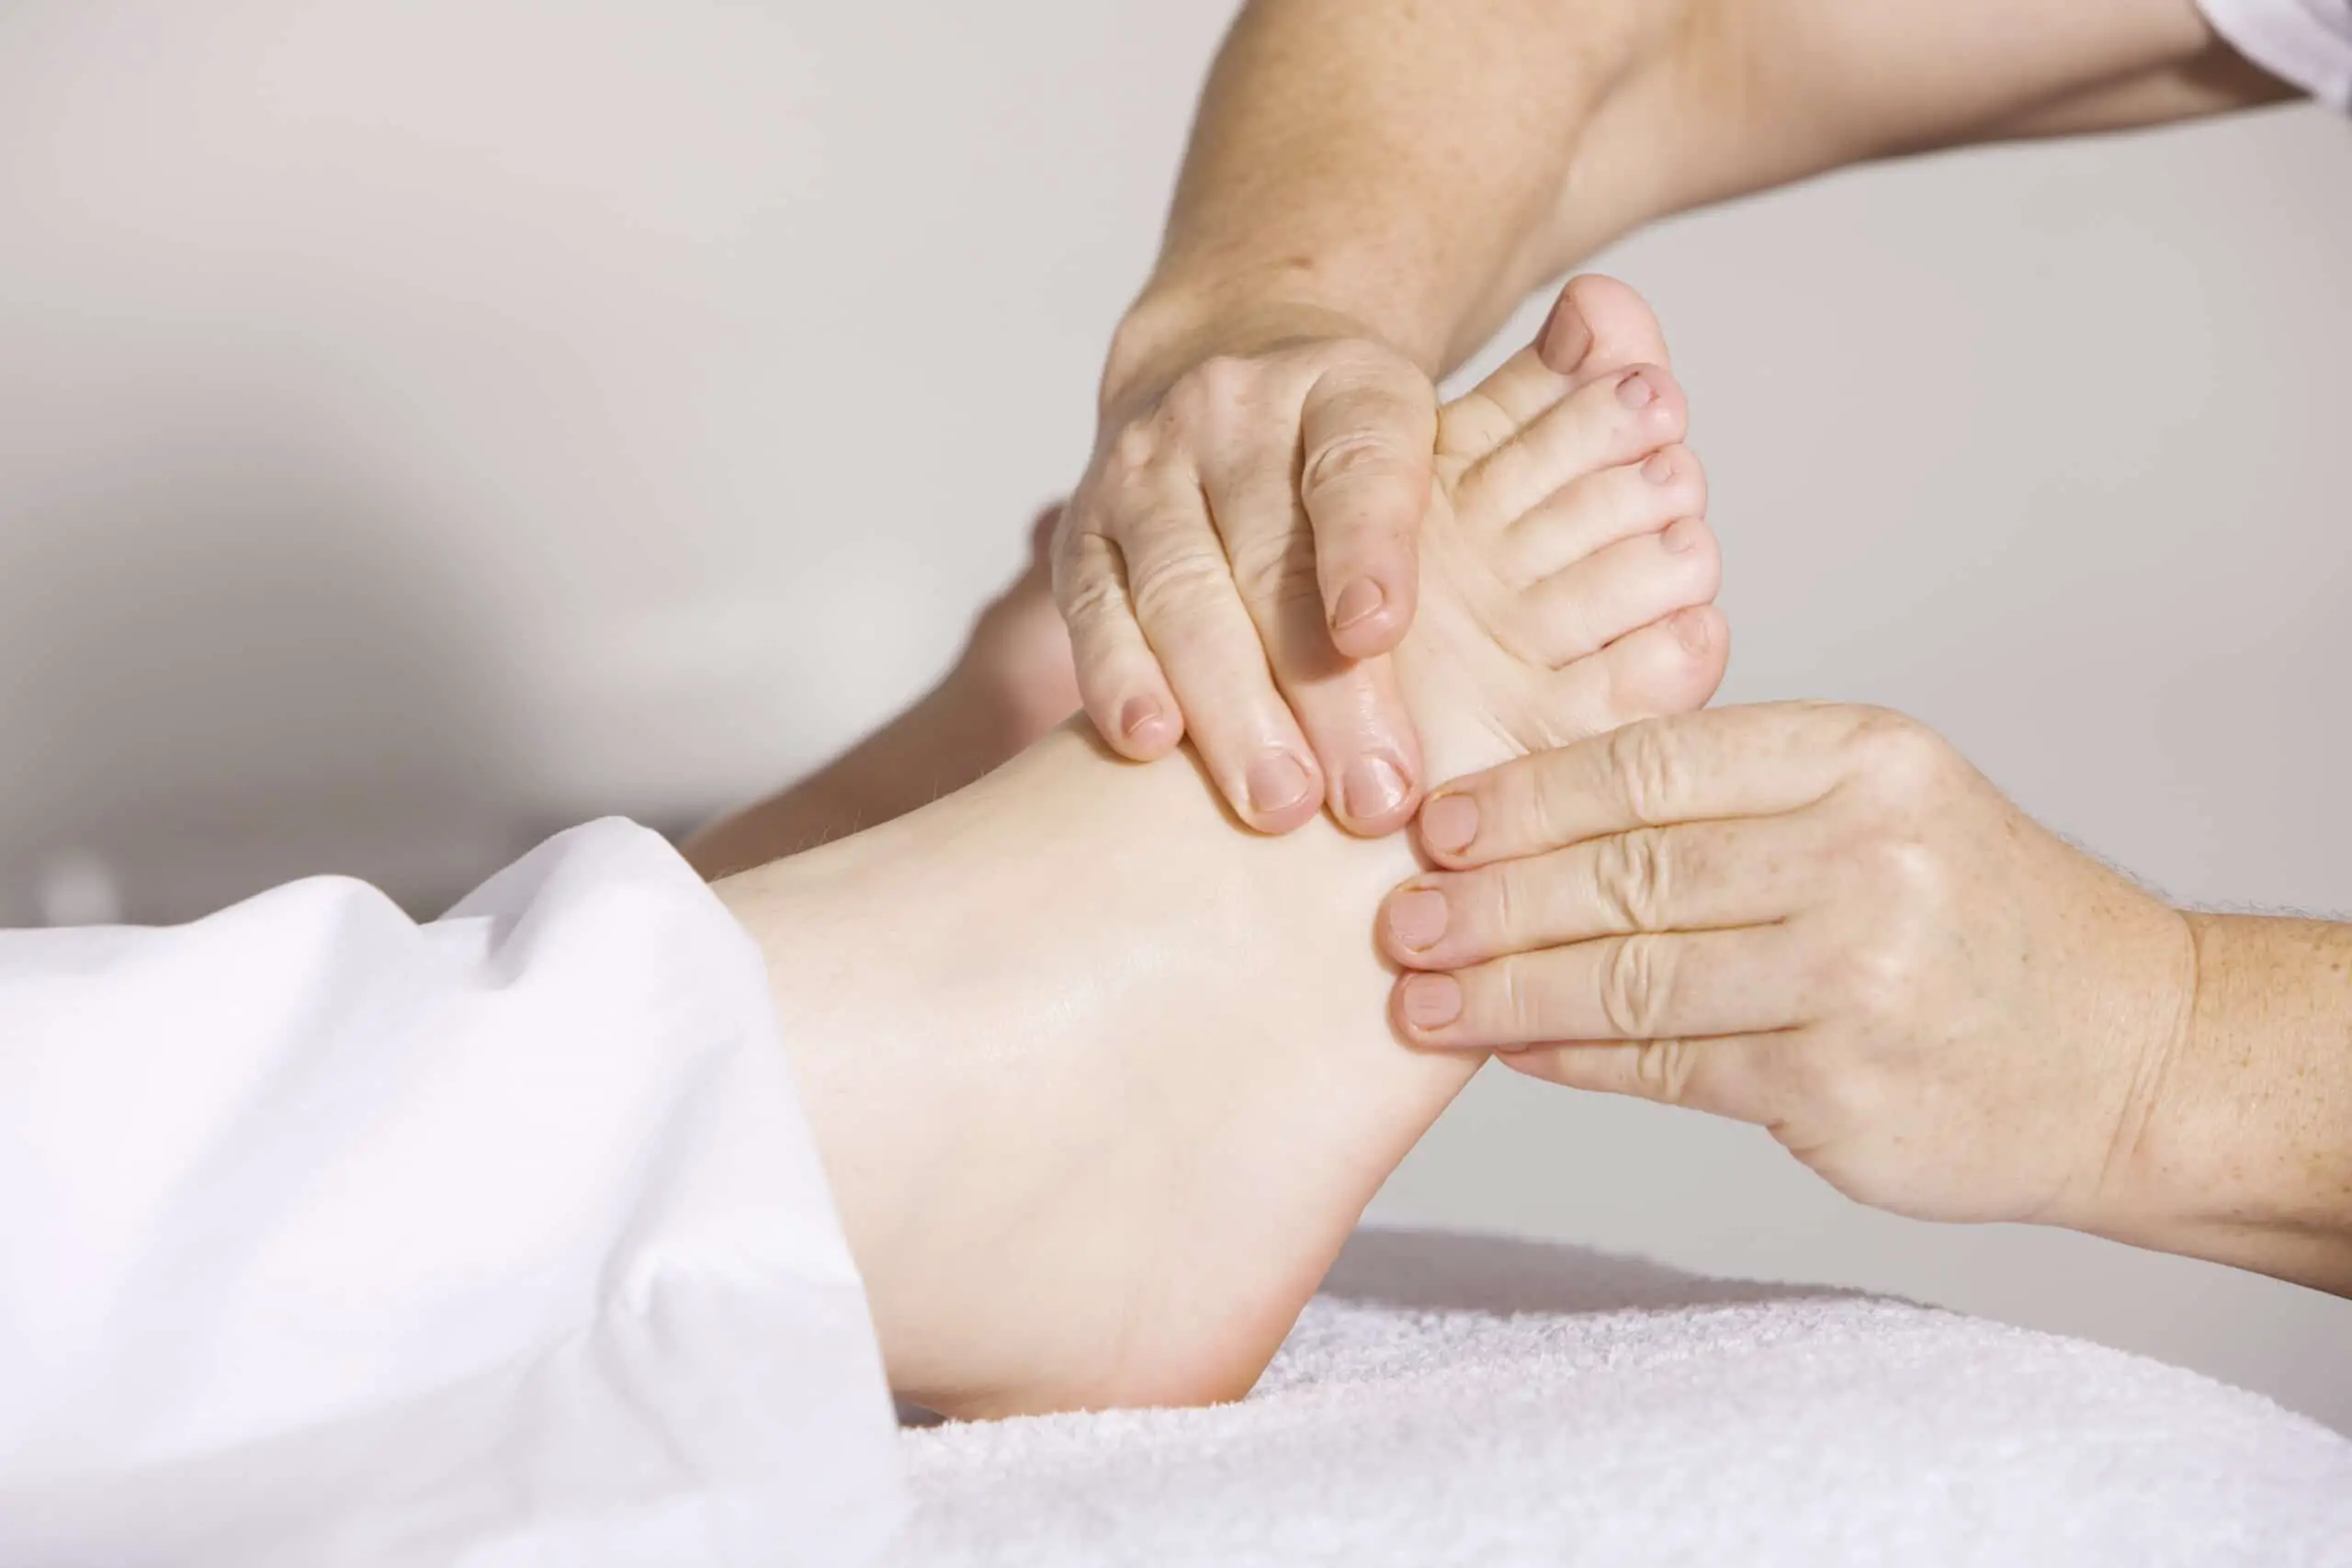 physical therapy, foot massage, massage